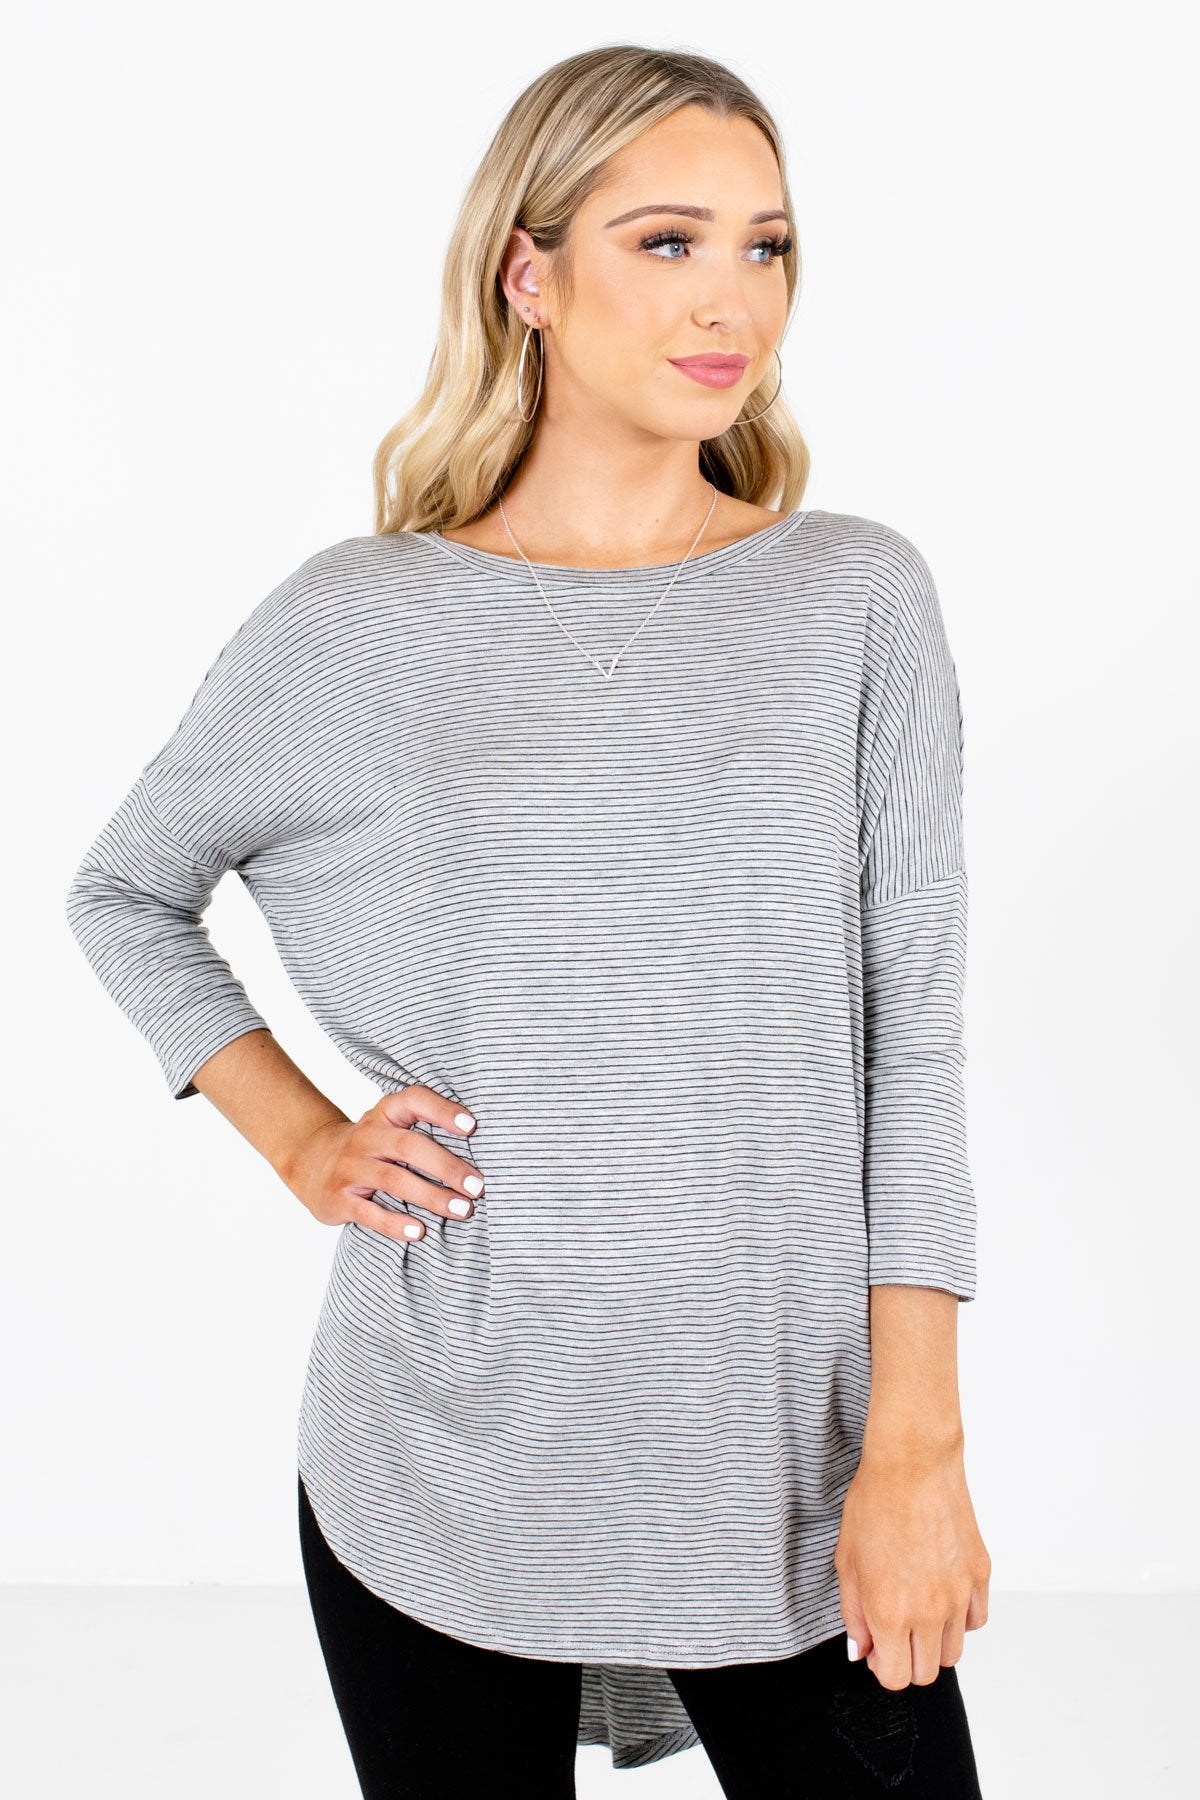 Women’s Gray Casual Everyday Boutique Tops